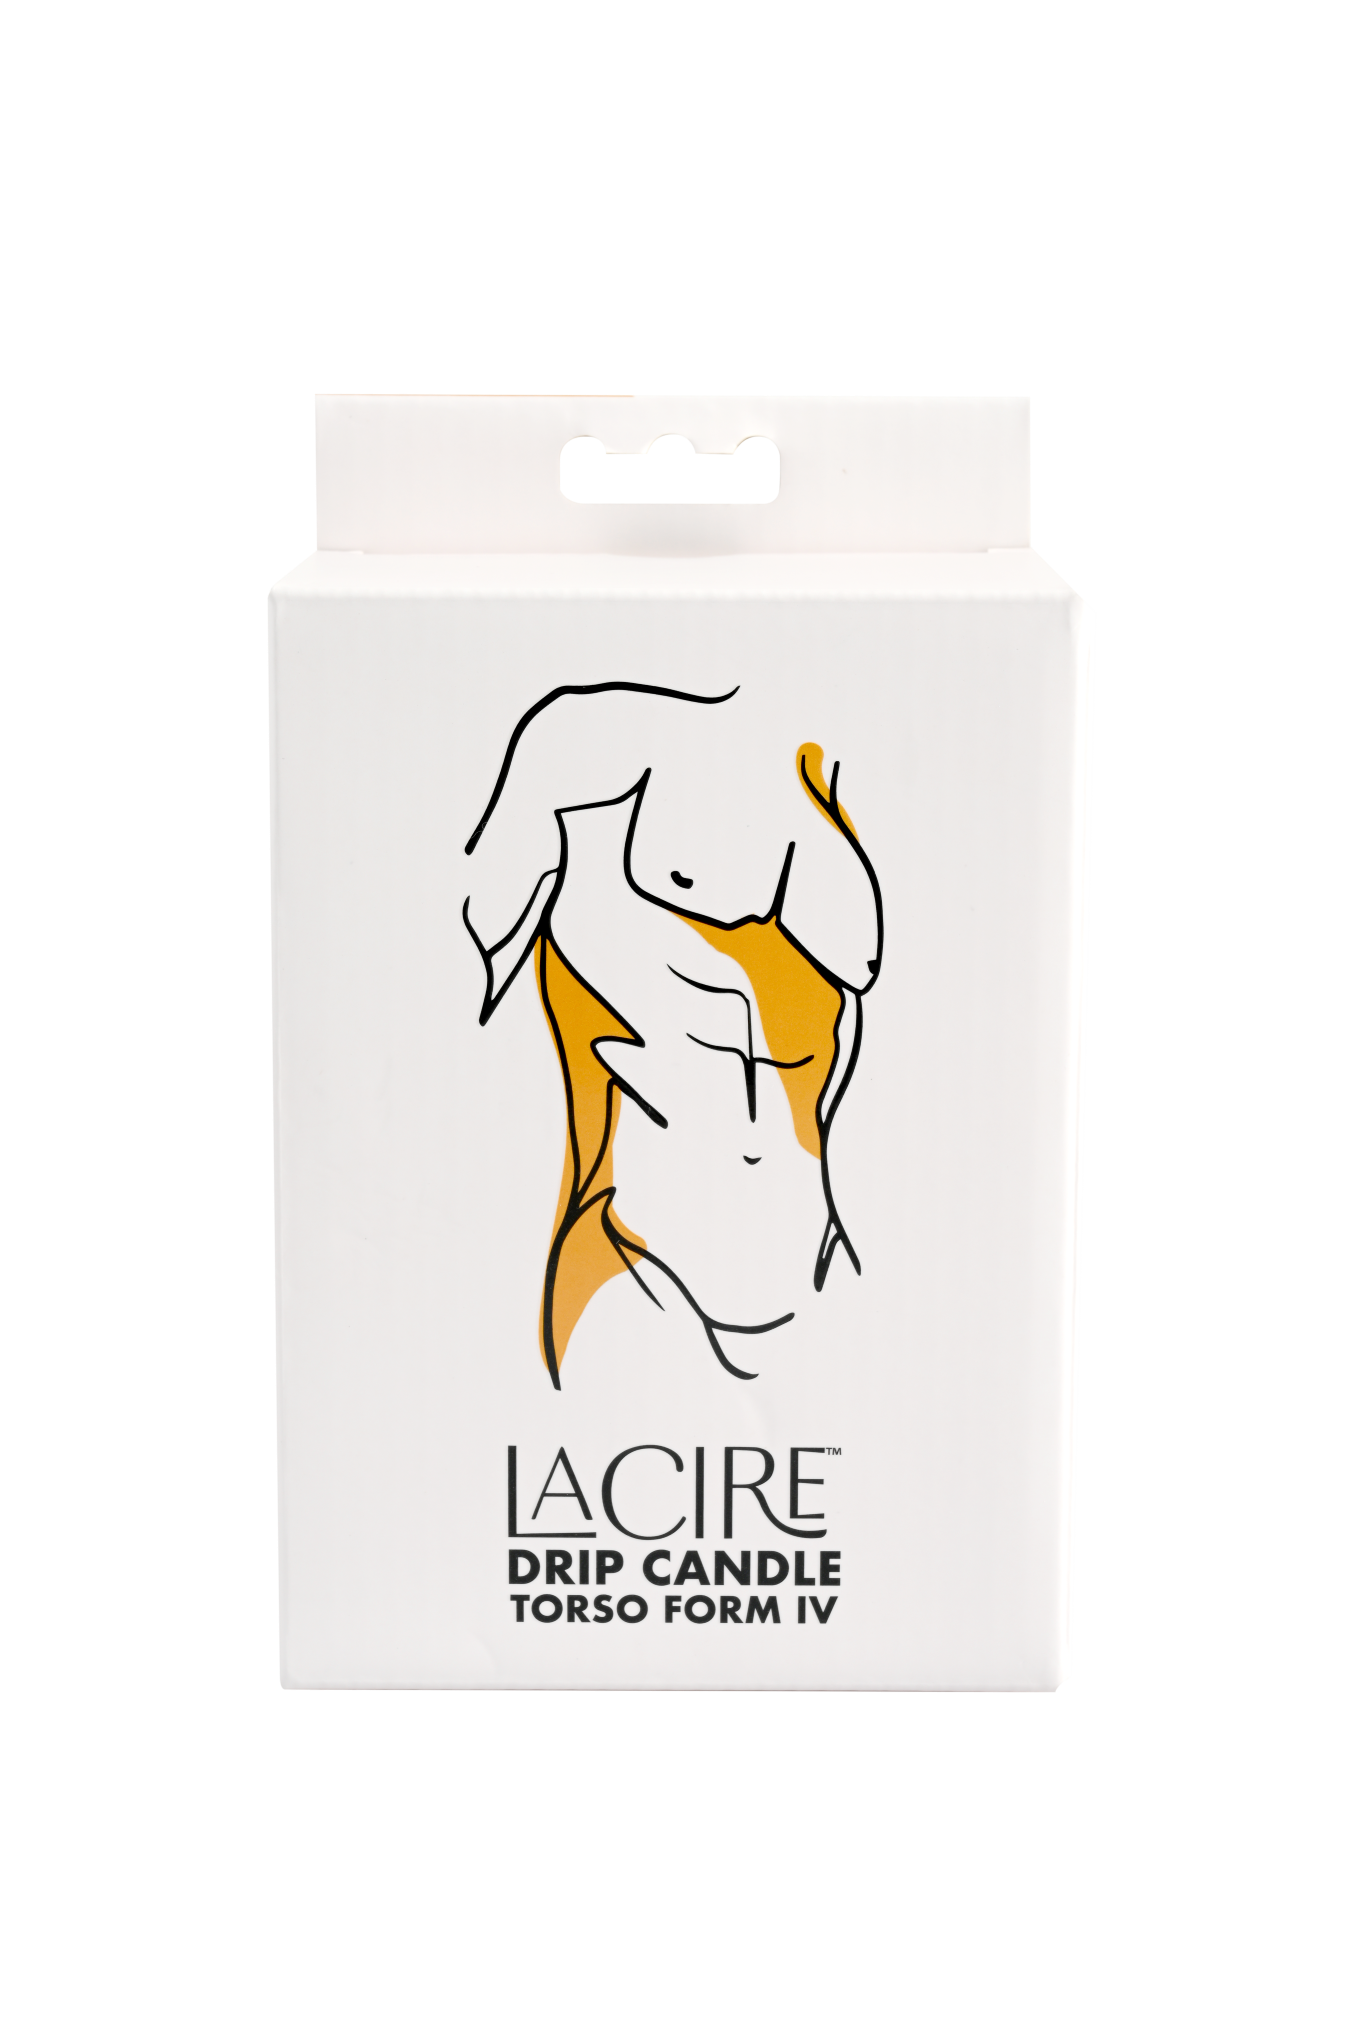 Photo of the front of the box for the aCire Torso Candle from Sportsheets (form 4/gold).